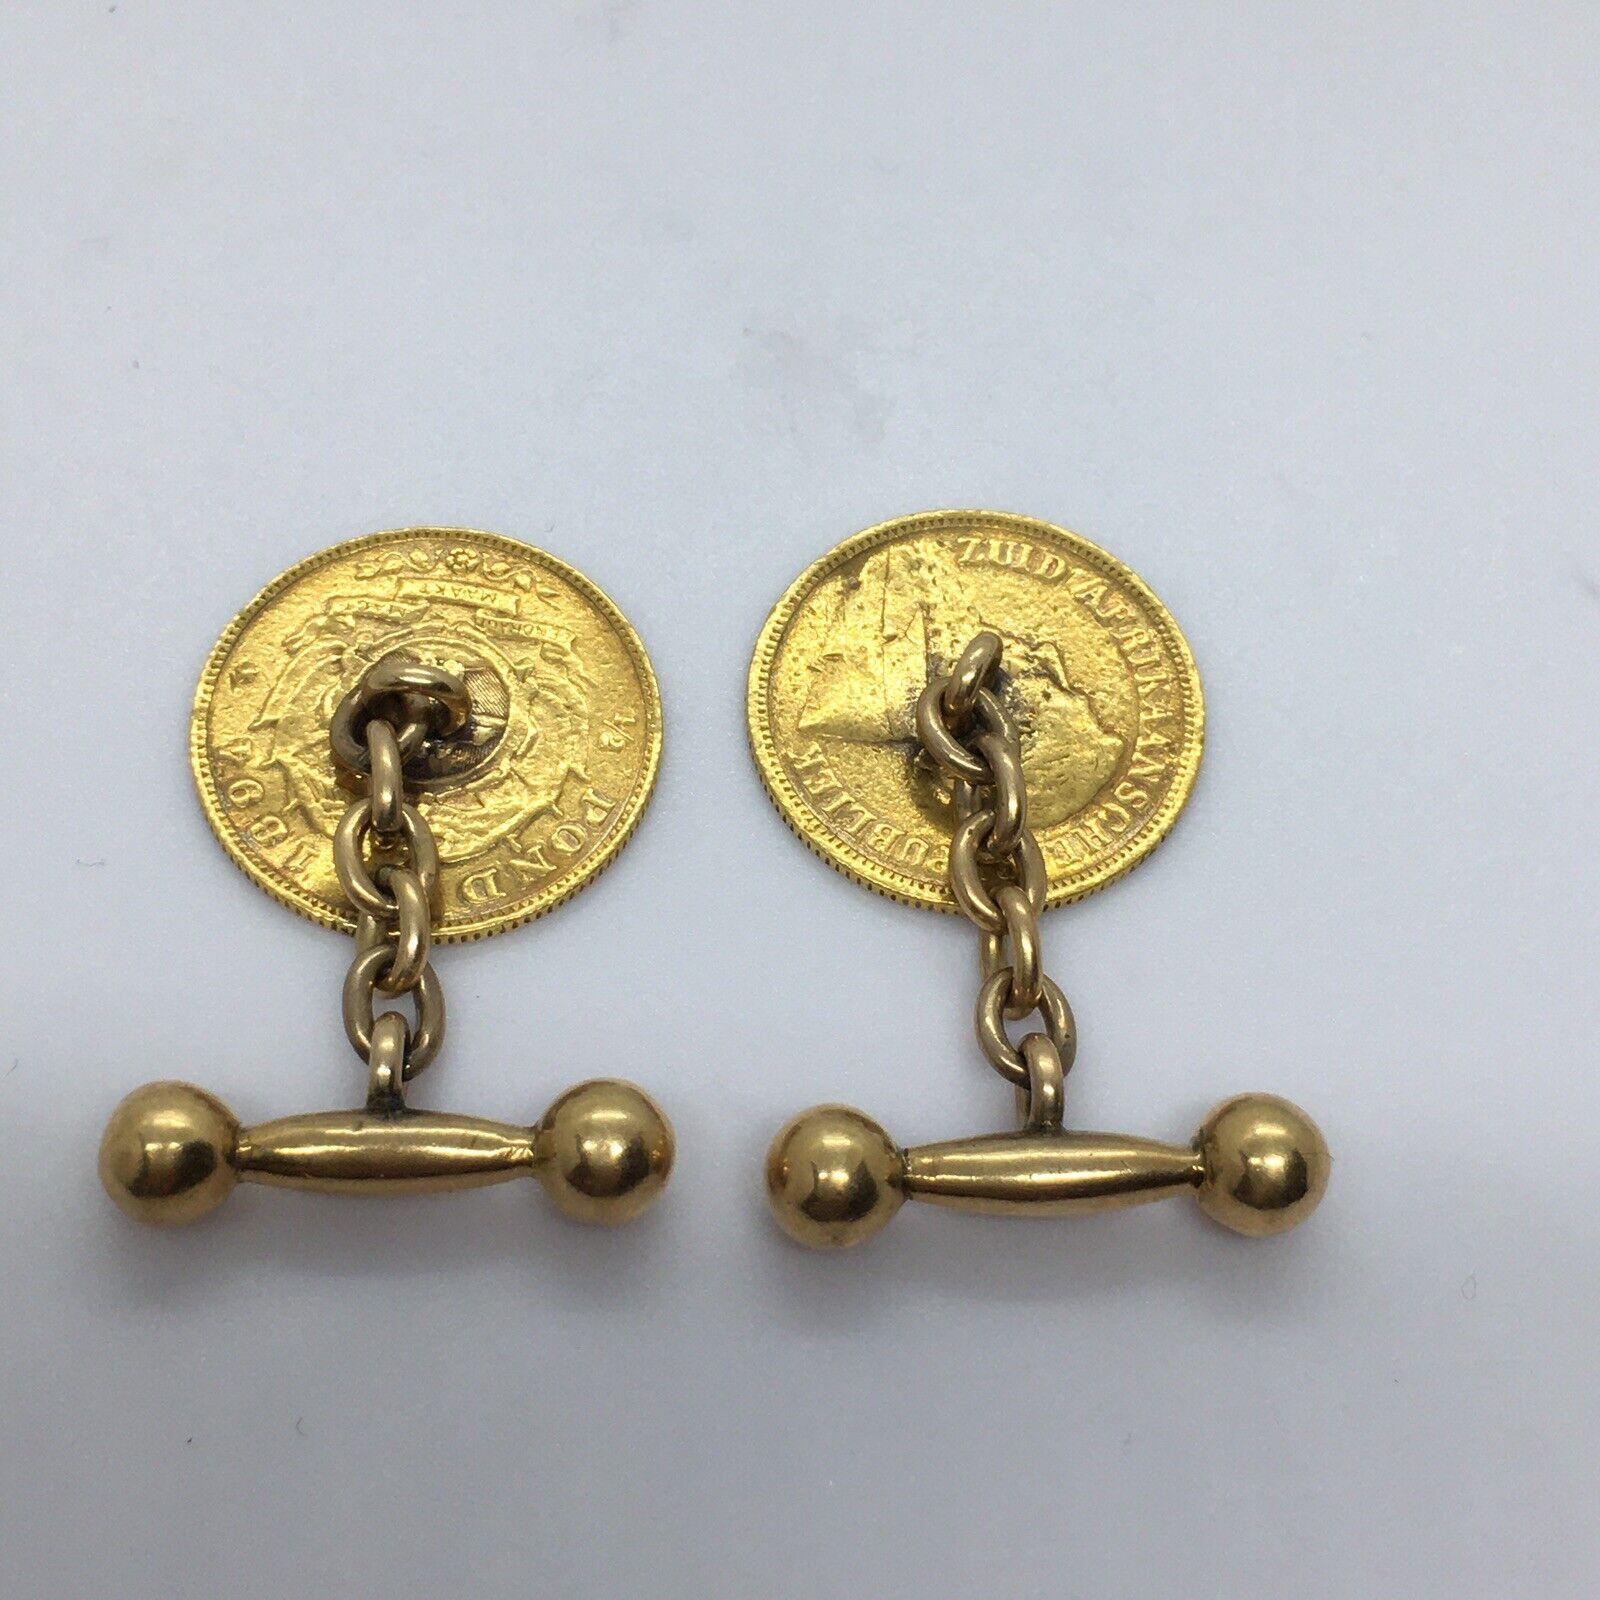 1897 Turn of Centuy 18K Gold Coin 1/2 Pond South Africa krugerrand Cufflinks

Weighting 16.1 gram
In good condition, minimum wear and tear, see pictures 
Circa 1890s

